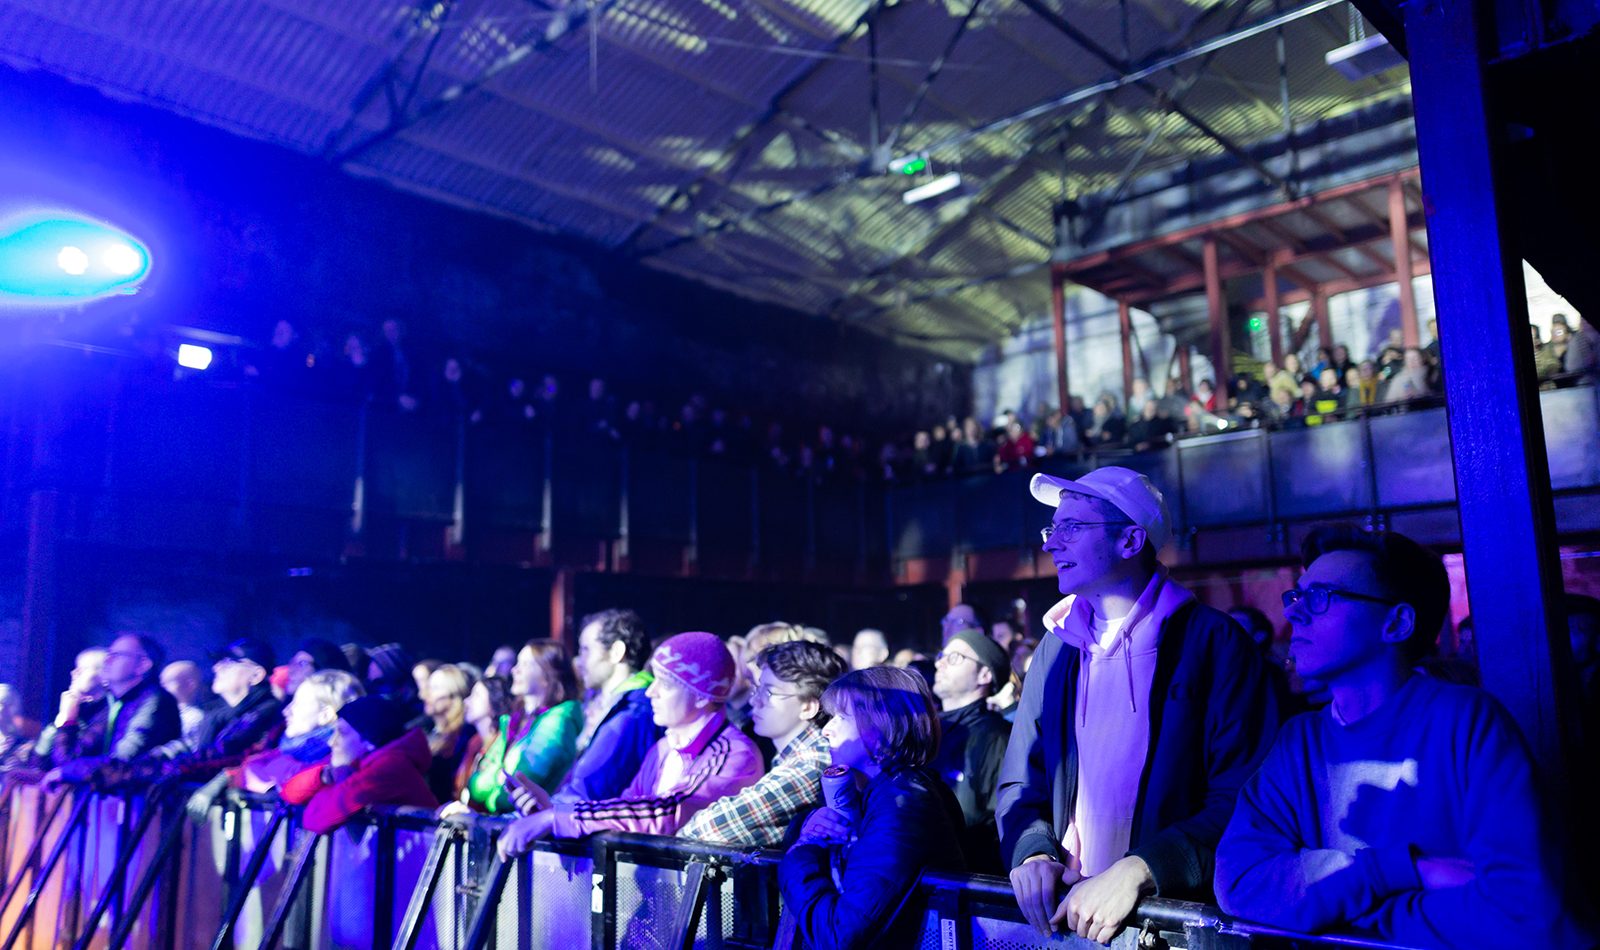 A gig crowd in a warehouse setting, dark, blue lighting, the standing audience watches an unseen stage